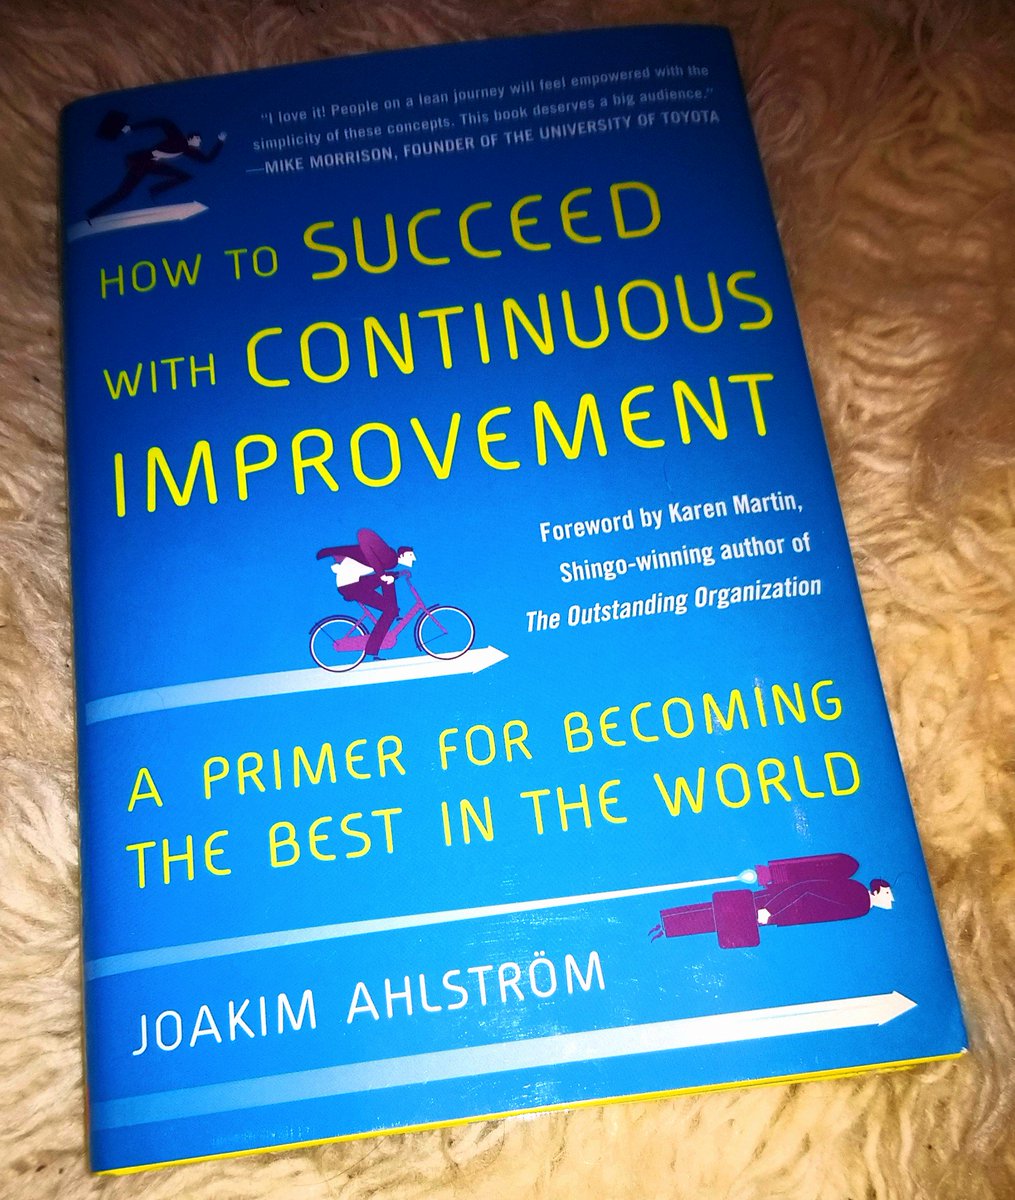 Inspired by my #QVisits to @UnipartConsults with @r2h_consulting... Sunday night reading 📚 #qualityimprovement #continuousimprovementculture #continuousimprovement #improvementmovement #improvementculture #QI